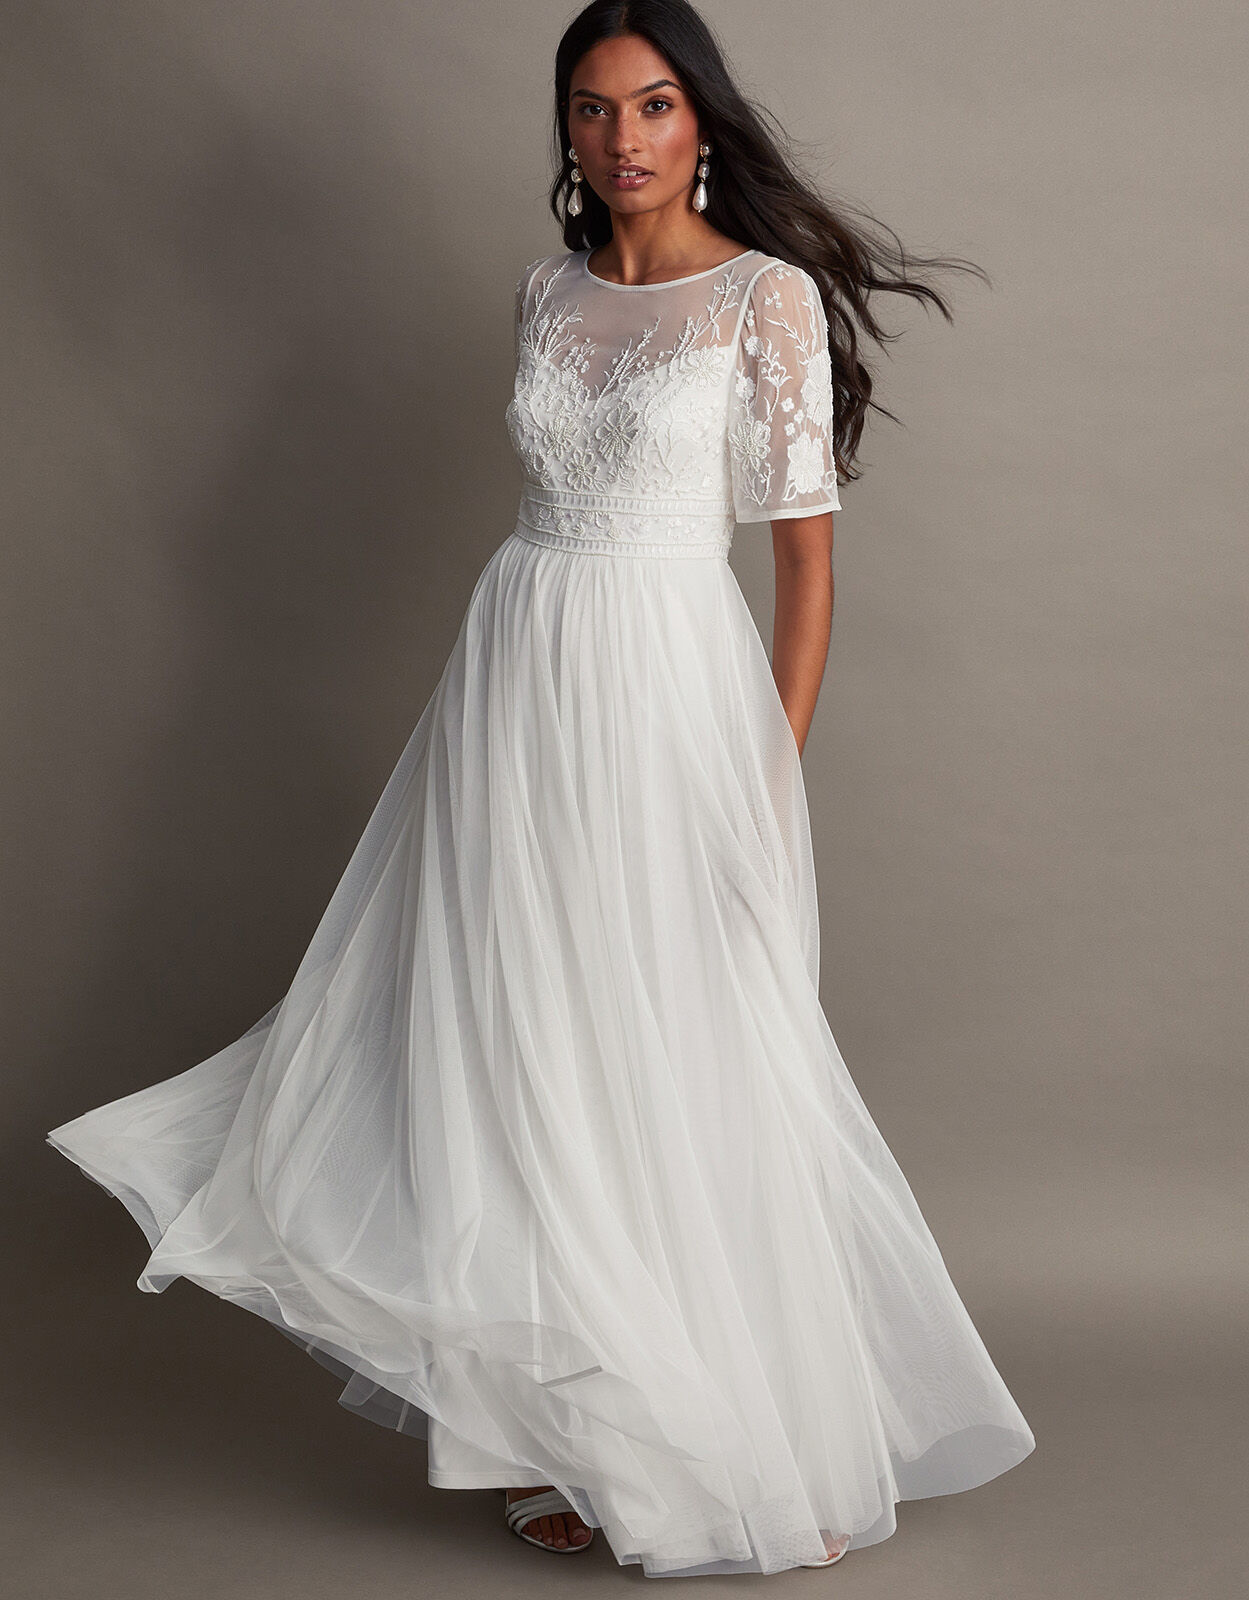 Buy Women's Lace Wedding Dresses for Bride with 3/4 Sleeves Plus Size Bridal  Gown at Amazon.in